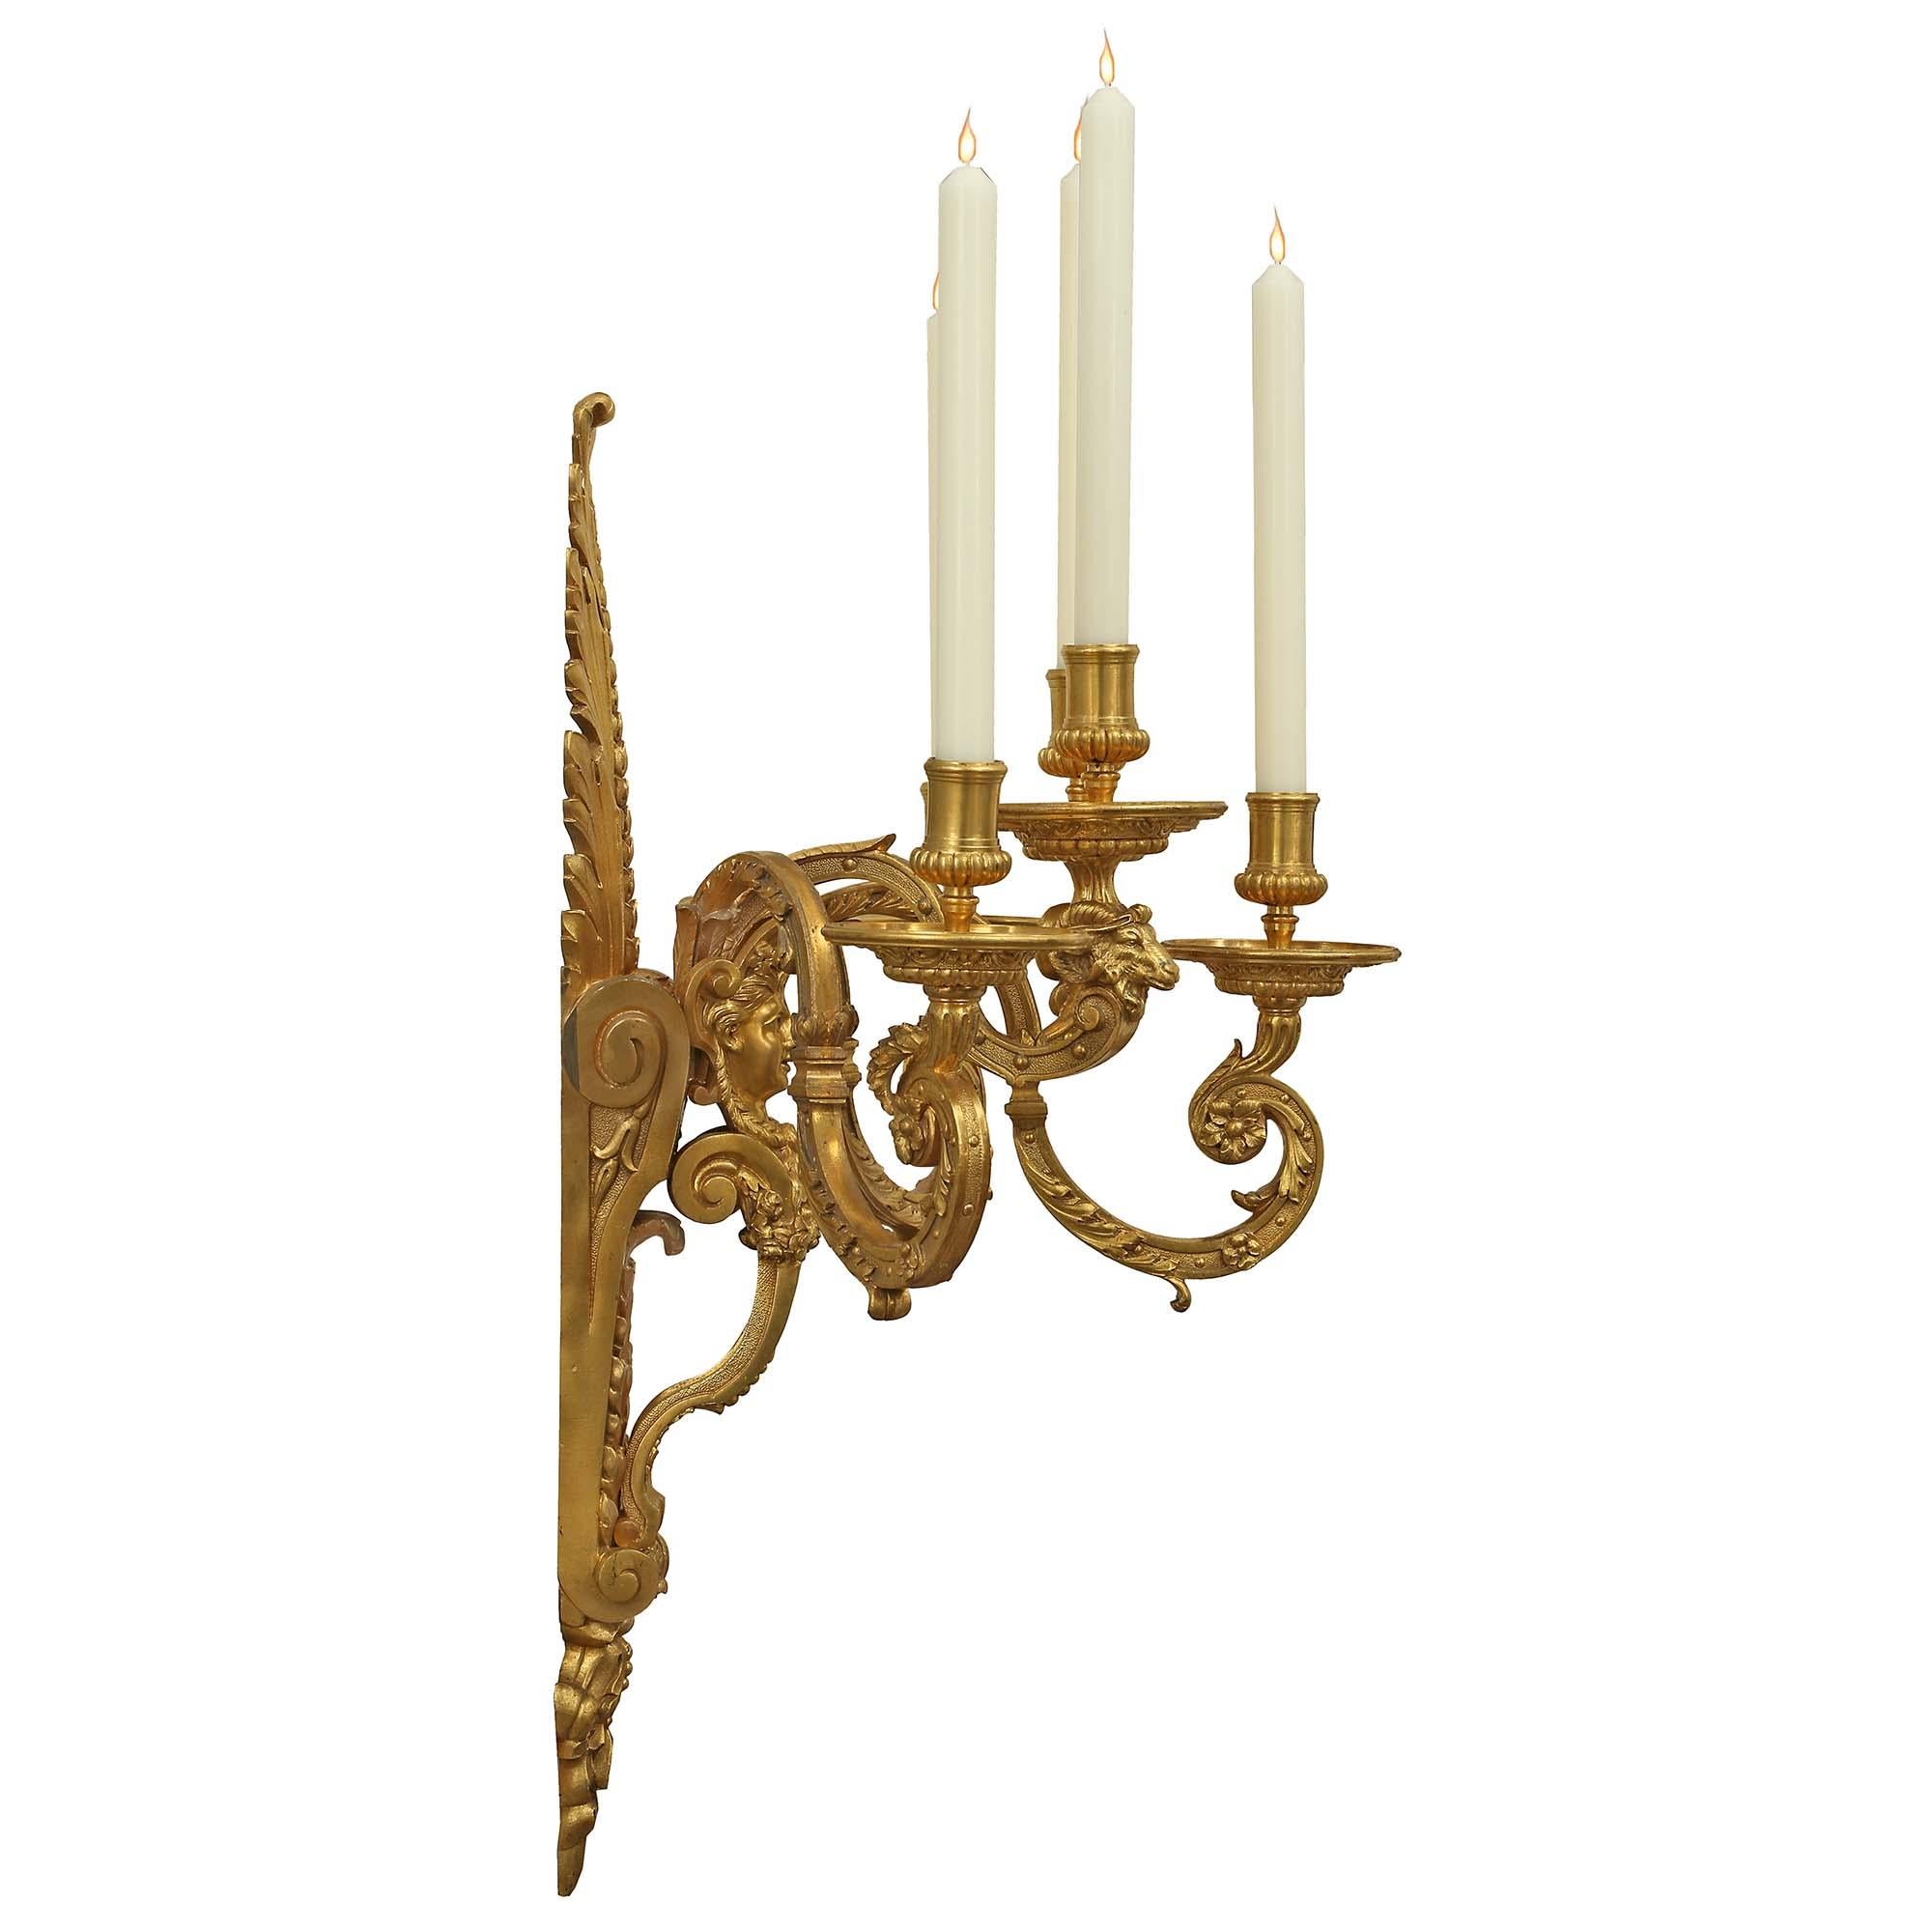 Pair of Mid-19th Century French Louis XIV St. Ormolu Five Arm Sconces In Good Condition For Sale In West Palm Beach, FL